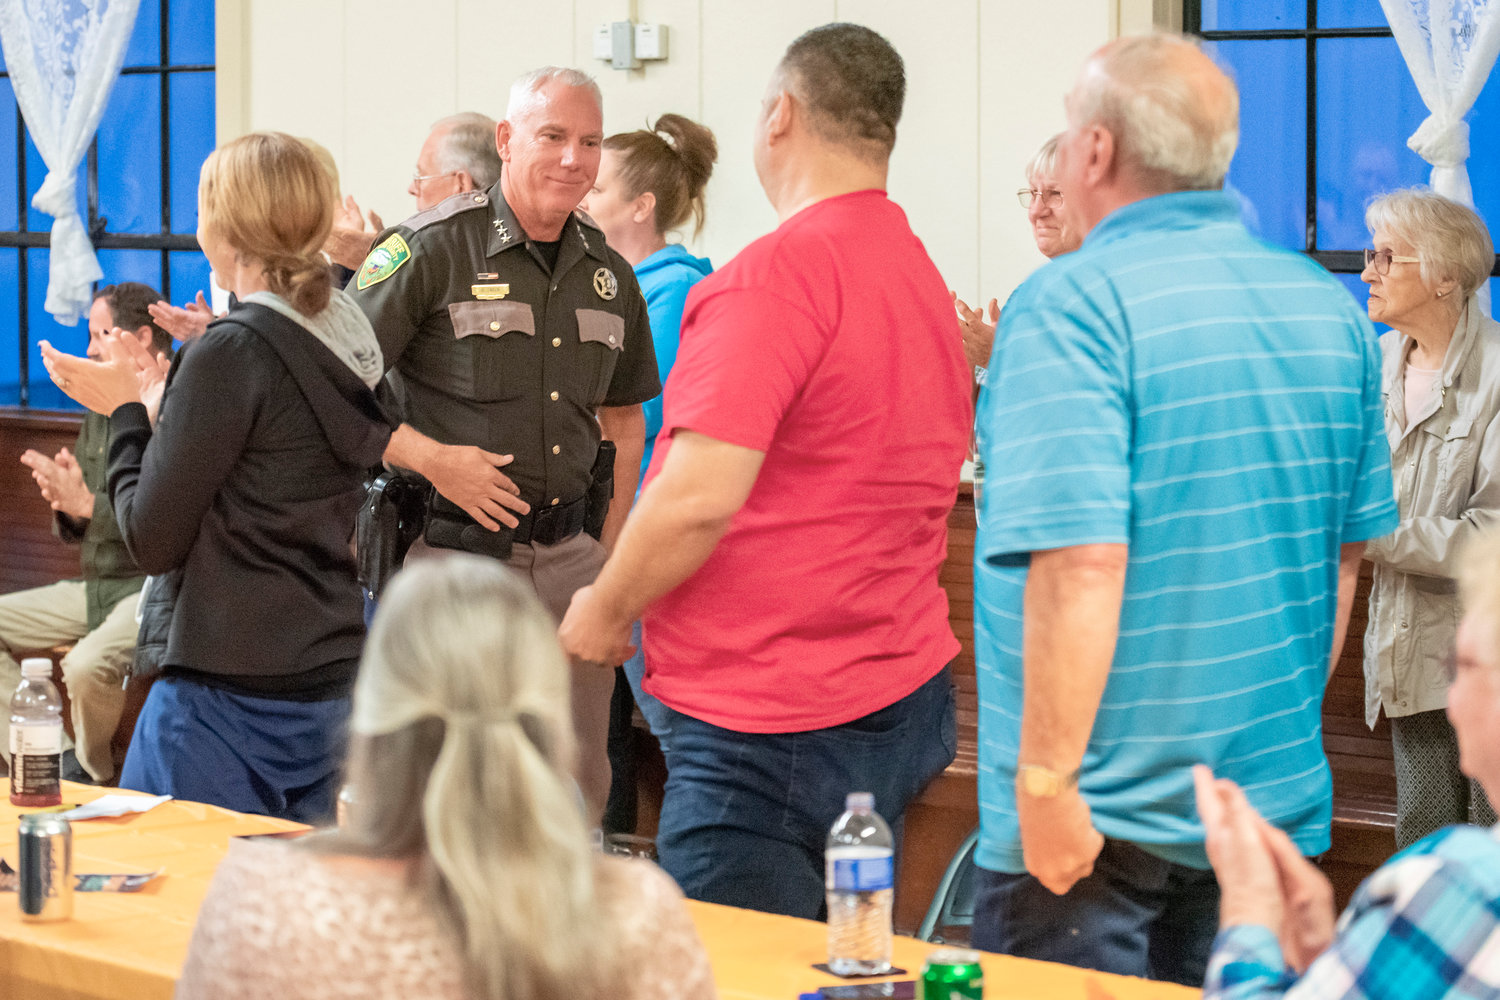 Sheriff Rob Snaza receives a standing ovation after his speech at the Winlock Community Center during a Lewis County Republicans meeting Monday evening.